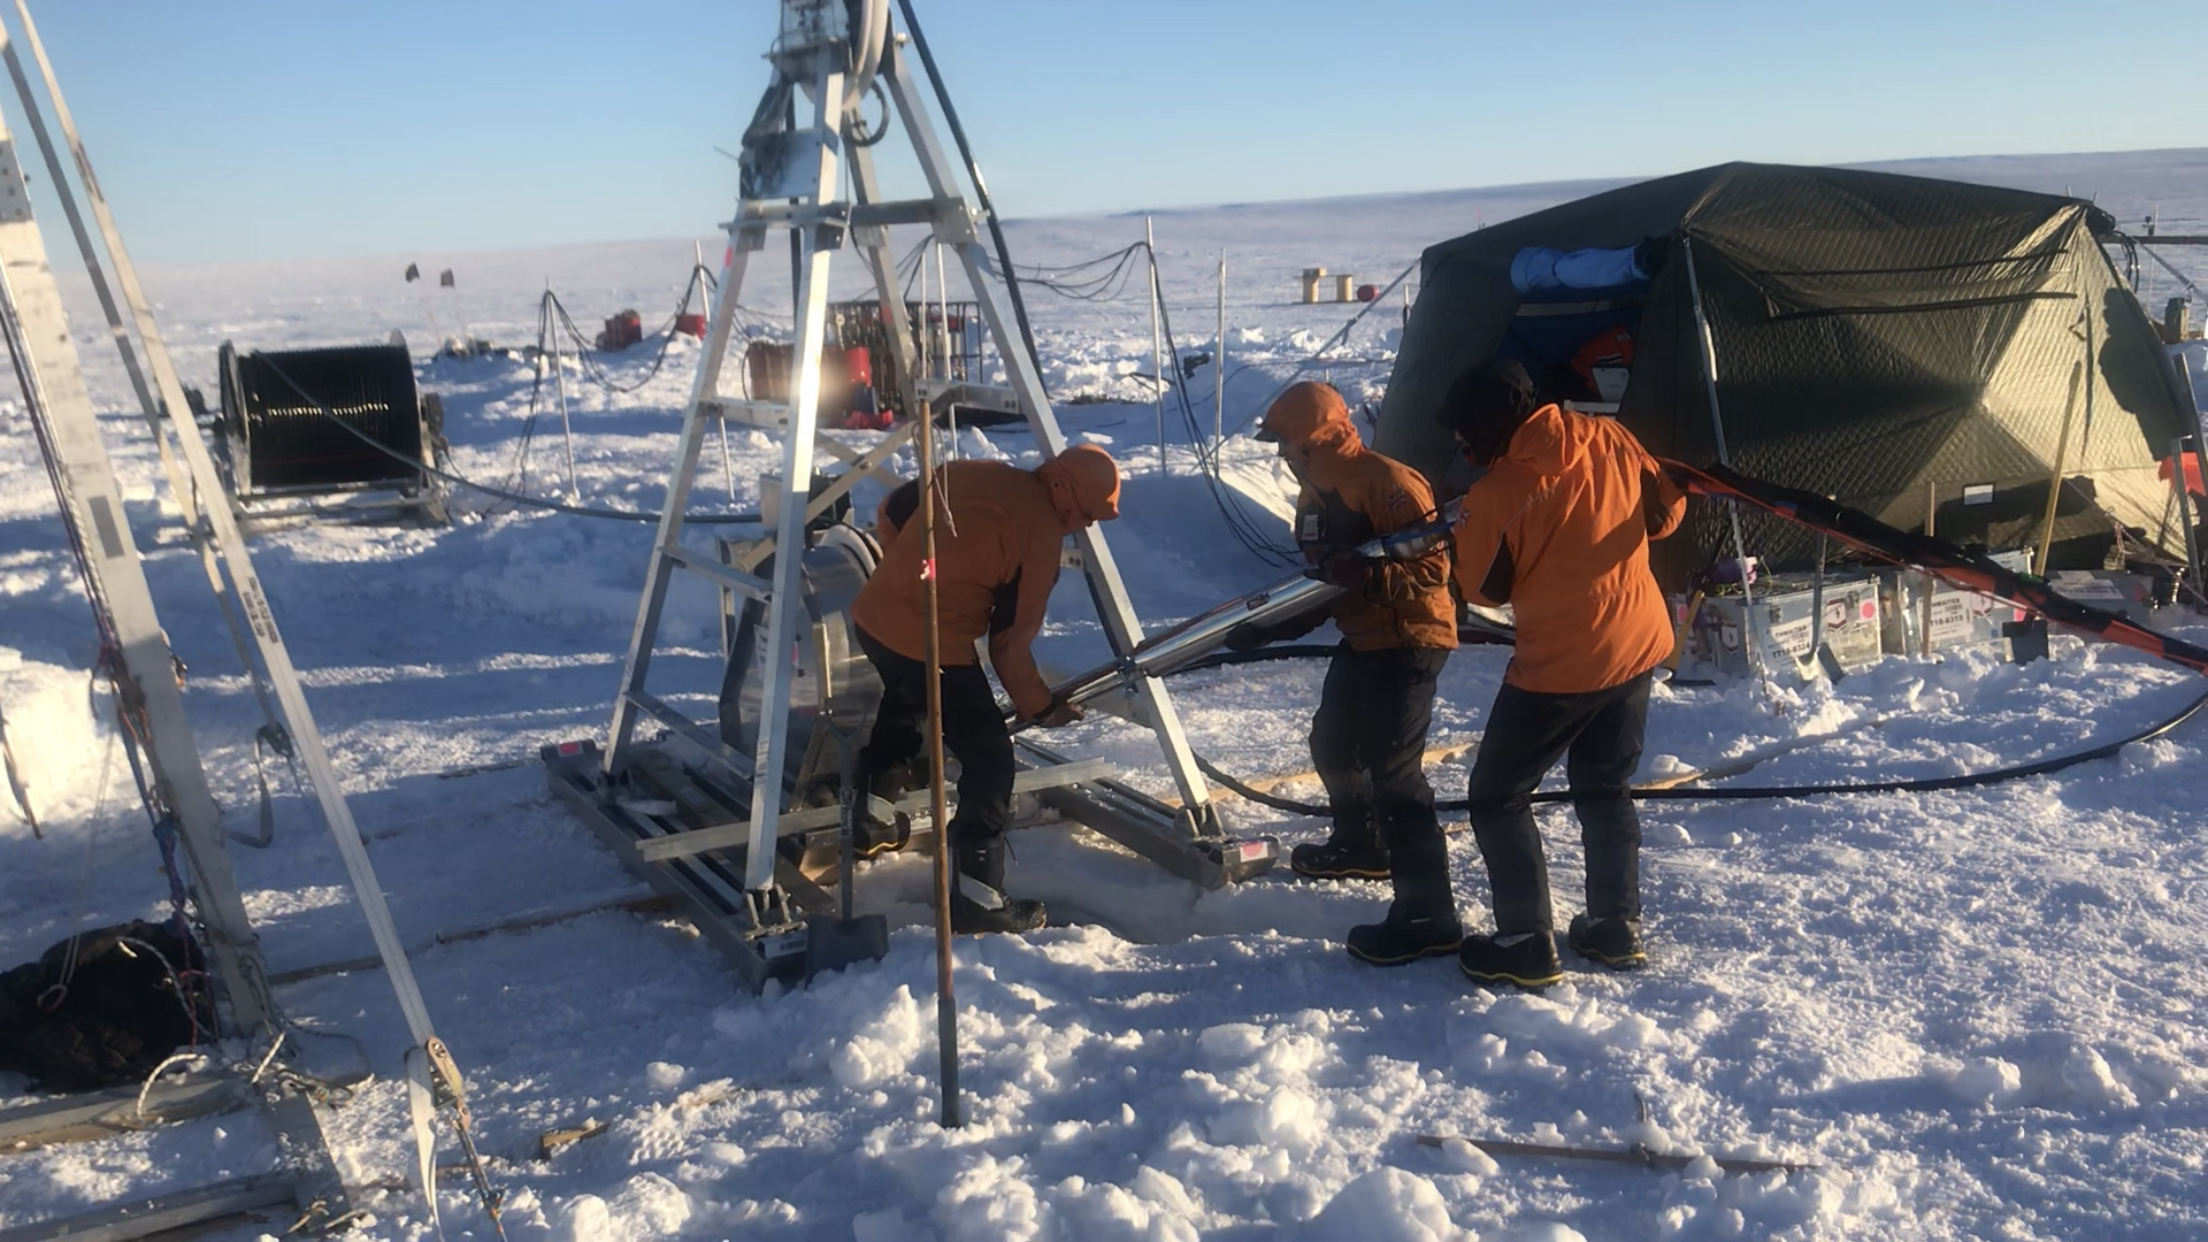 Photo of the BAS team deploying the hot water drill at Thwaites Glacier including Paul Anker, Keith Nicholls, James Smith and Peter Davis Credit: Icefin/ITGC/Schmidt